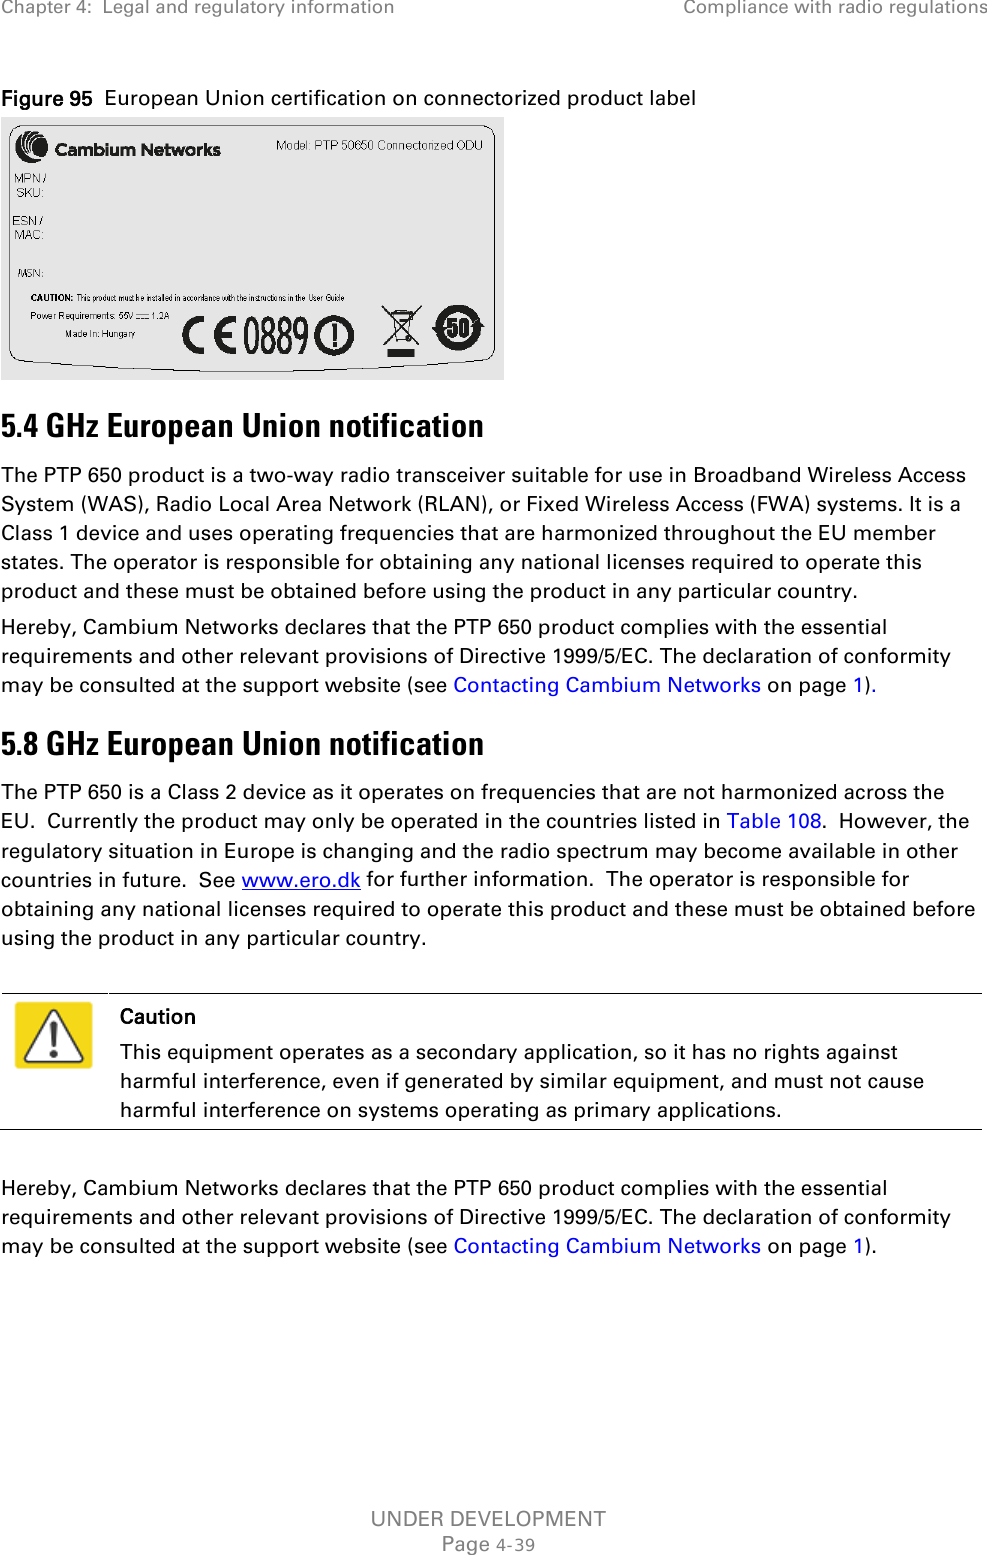 Chapter 4:  Legal and regulatory information Compliance with radio regulations  Figure 95  European Union certification on connectorized product label  5.4 GHz European Union notification The PTP 650 product is a two-way radio transceiver suitable for use in Broadband Wireless Access System (WAS), Radio Local Area Network (RLAN), or Fixed Wireless Access (FWA) systems. It is a Class 1 device and uses operating frequencies that are harmonized throughout the EU member states. The operator is responsible for obtaining any national licenses required to operate this product and these must be obtained before using the product in any particular country. Hereby, Cambium Networks declares that the PTP 650 product complies with the essential requirements and other relevant provisions of Directive 1999/5/EC. The declaration of conformity may be consulted at the support website (see Contacting Cambium Networks on page 1).  5.8 GHz European Union notification The PTP 650 is a Class 2 device as it operates on frequencies that are not harmonized across the EU.  Currently the product may only be operated in the countries listed in Table 108.  However, the regulatory situation in Europe is changing and the radio spectrum may become available in other countries in future.  See www.ero.dk for further information.  The operator is responsible for obtaining any national licenses required to operate this product and these must be obtained before using the product in any particular country.   Caution This equipment operates as a secondary application, so it has no rights against harmful interference, even if generated by similar equipment, and must not cause harmful interference on systems operating as primary applications.  Hereby, Cambium Networks declares that the PTP 650 product complies with the essential requirements and other relevant provisions of Directive 1999/5/EC. The declaration of conformity may be consulted at the support website (see Contacting Cambium Networks on page 1). UNDER DEVELOPMENT Page 4-39 